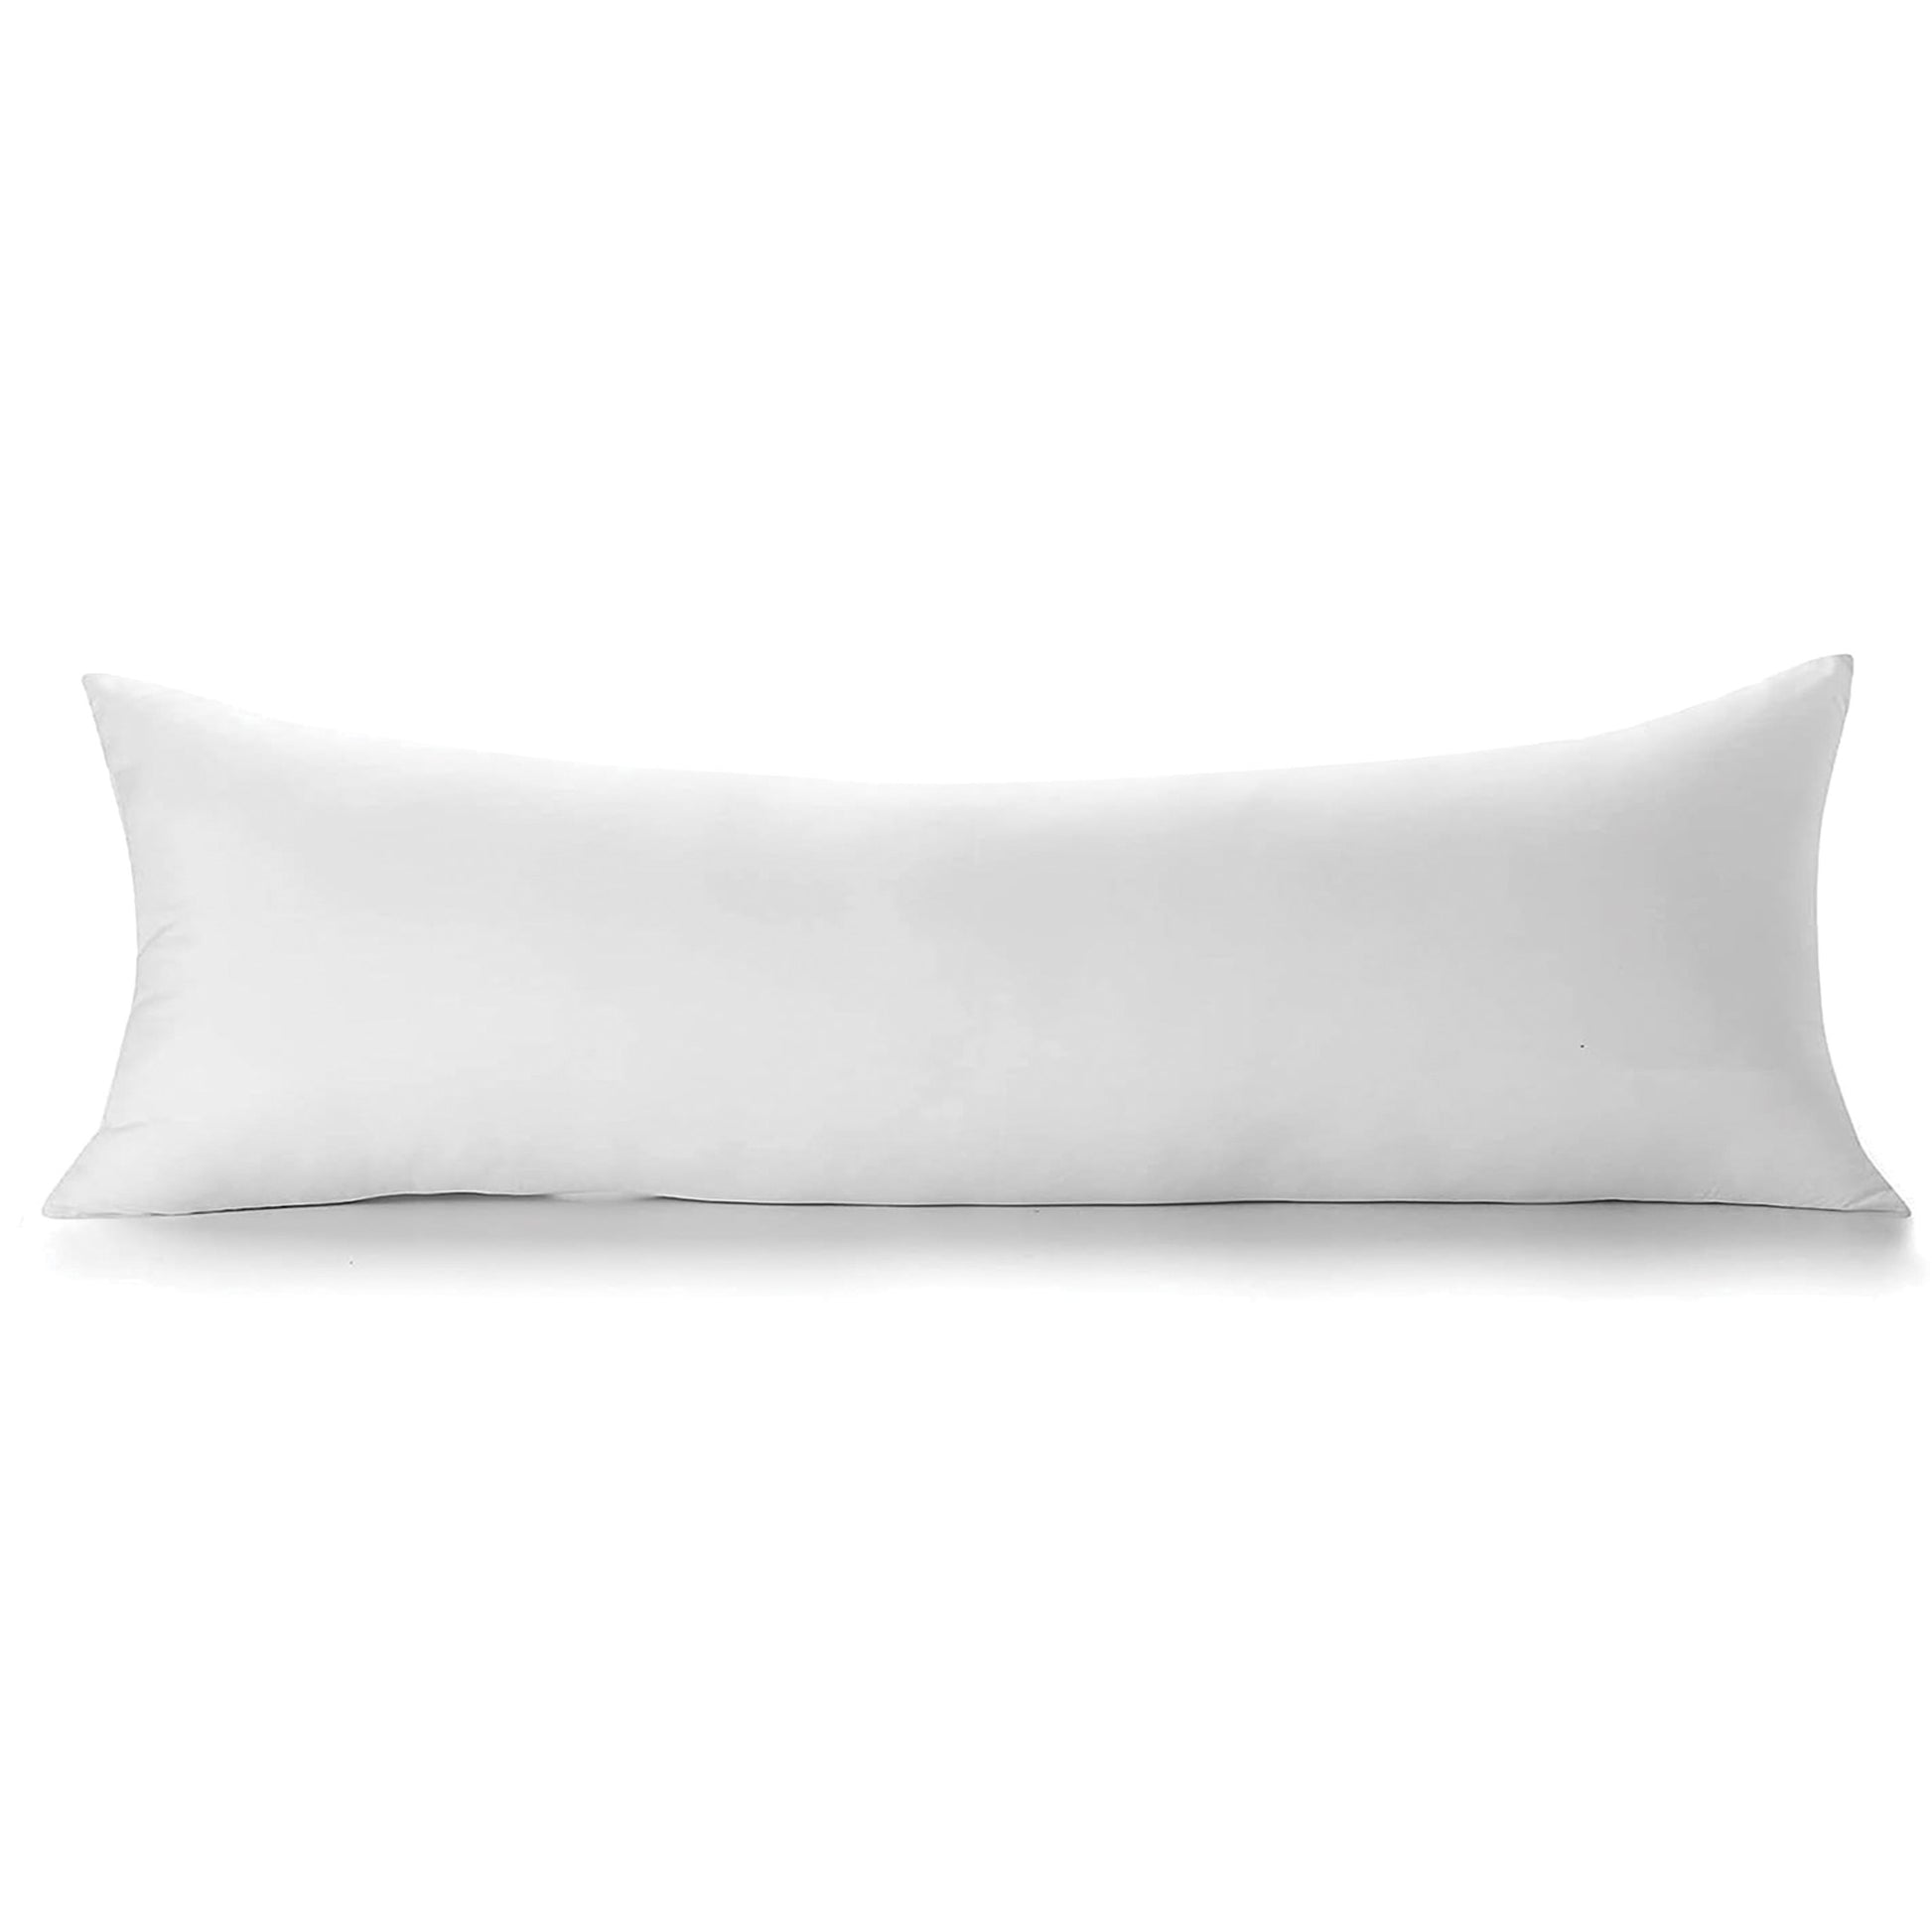 A white body pillow filled with 100% goose down, boasting a plush 600 fill power for ultimate softness and comfort during sleep.